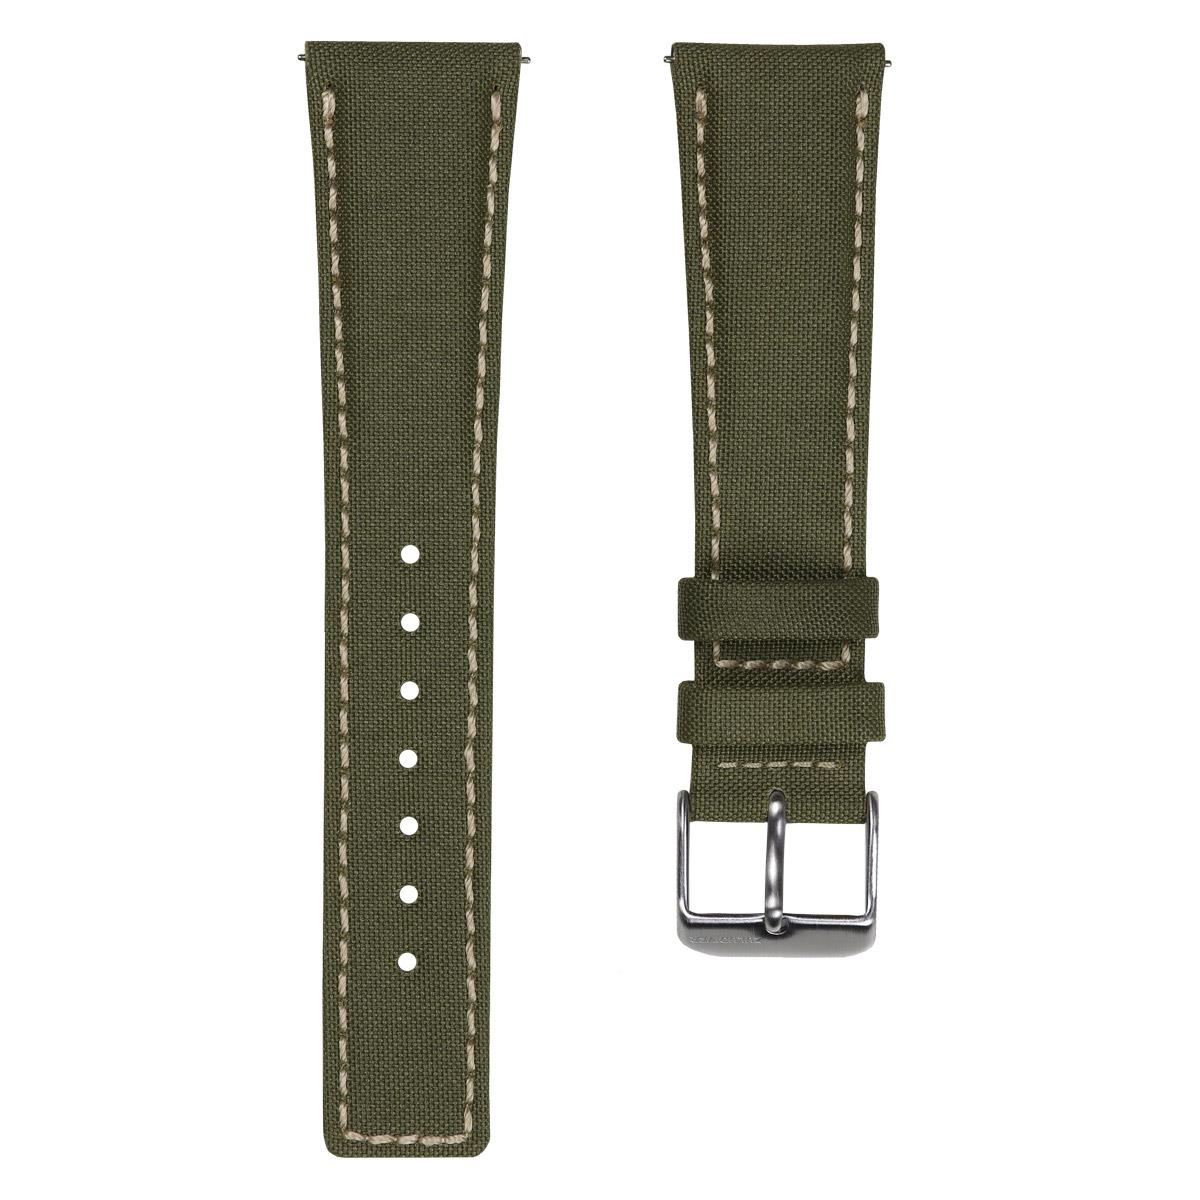 Green SEAQUAL Sailcloth Replacement Watch Strap